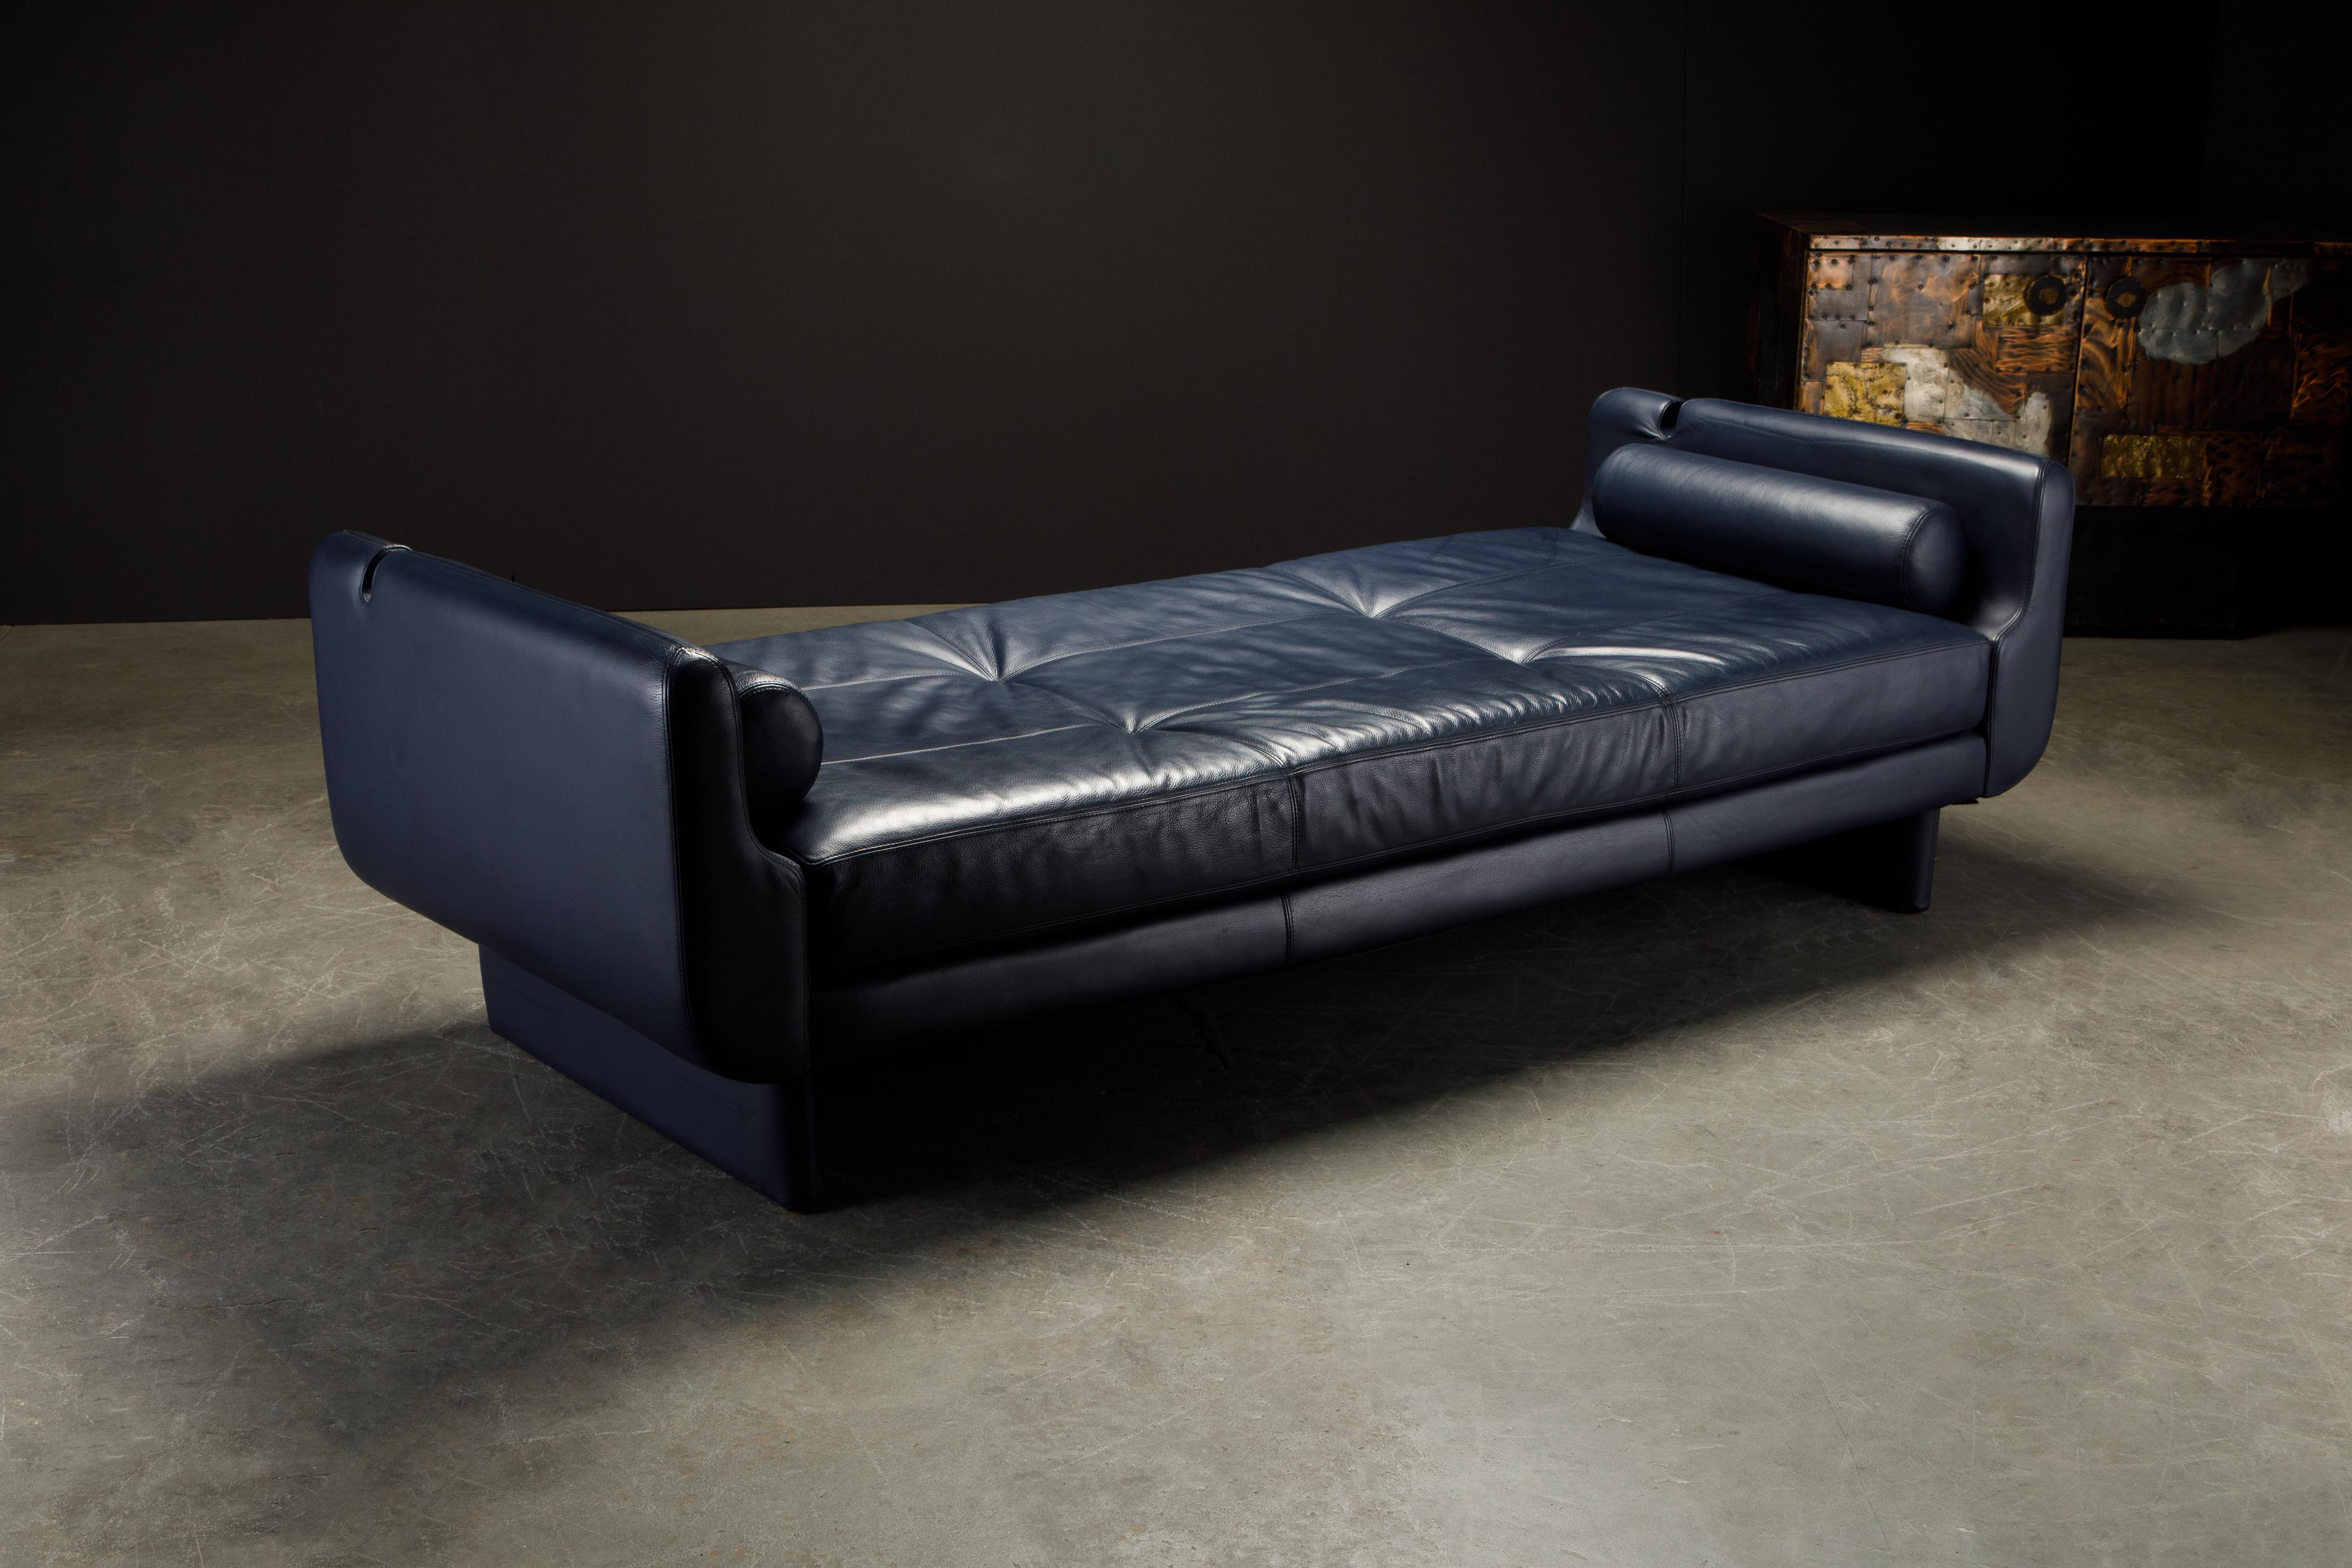 Contemporary Vladimir Kagan for American Leather 'Matinee' Blue Leather Sofa Daybed, Signed